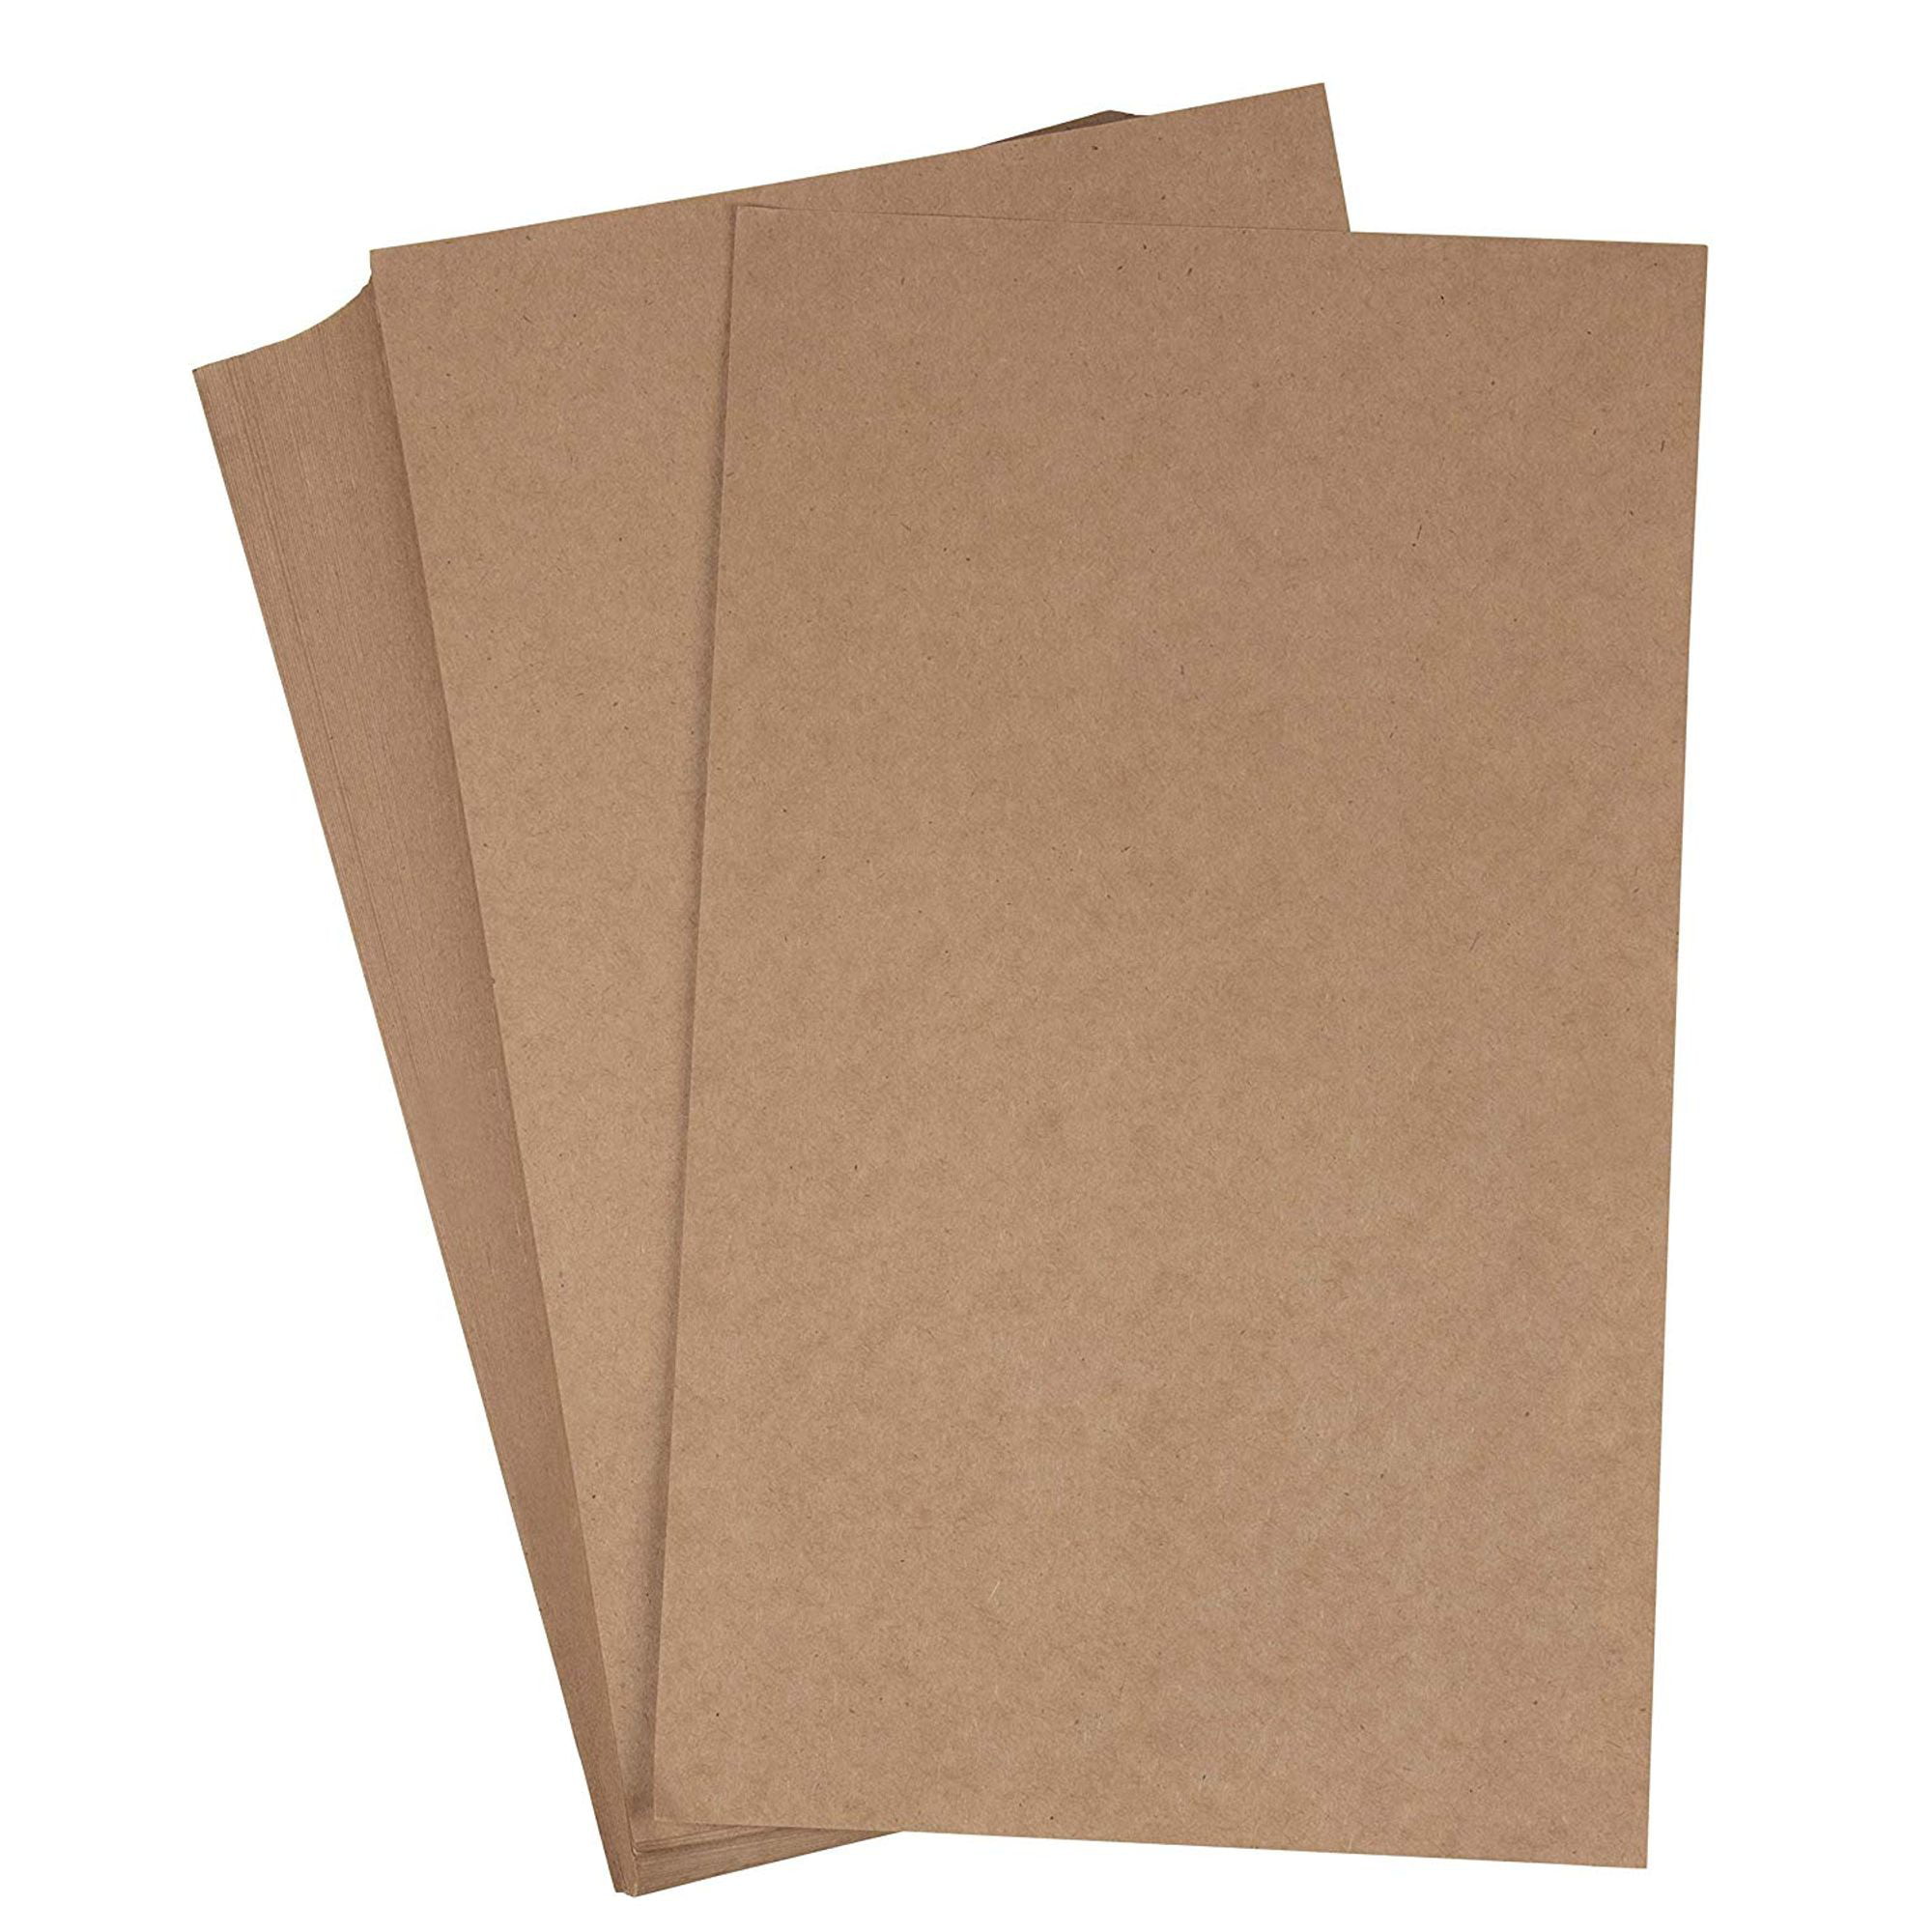 25 x QUALITY THICK BROWN KRAFT WRAPPING PAPER SHEETS 750x1150mm *100% RECYCLABLE 